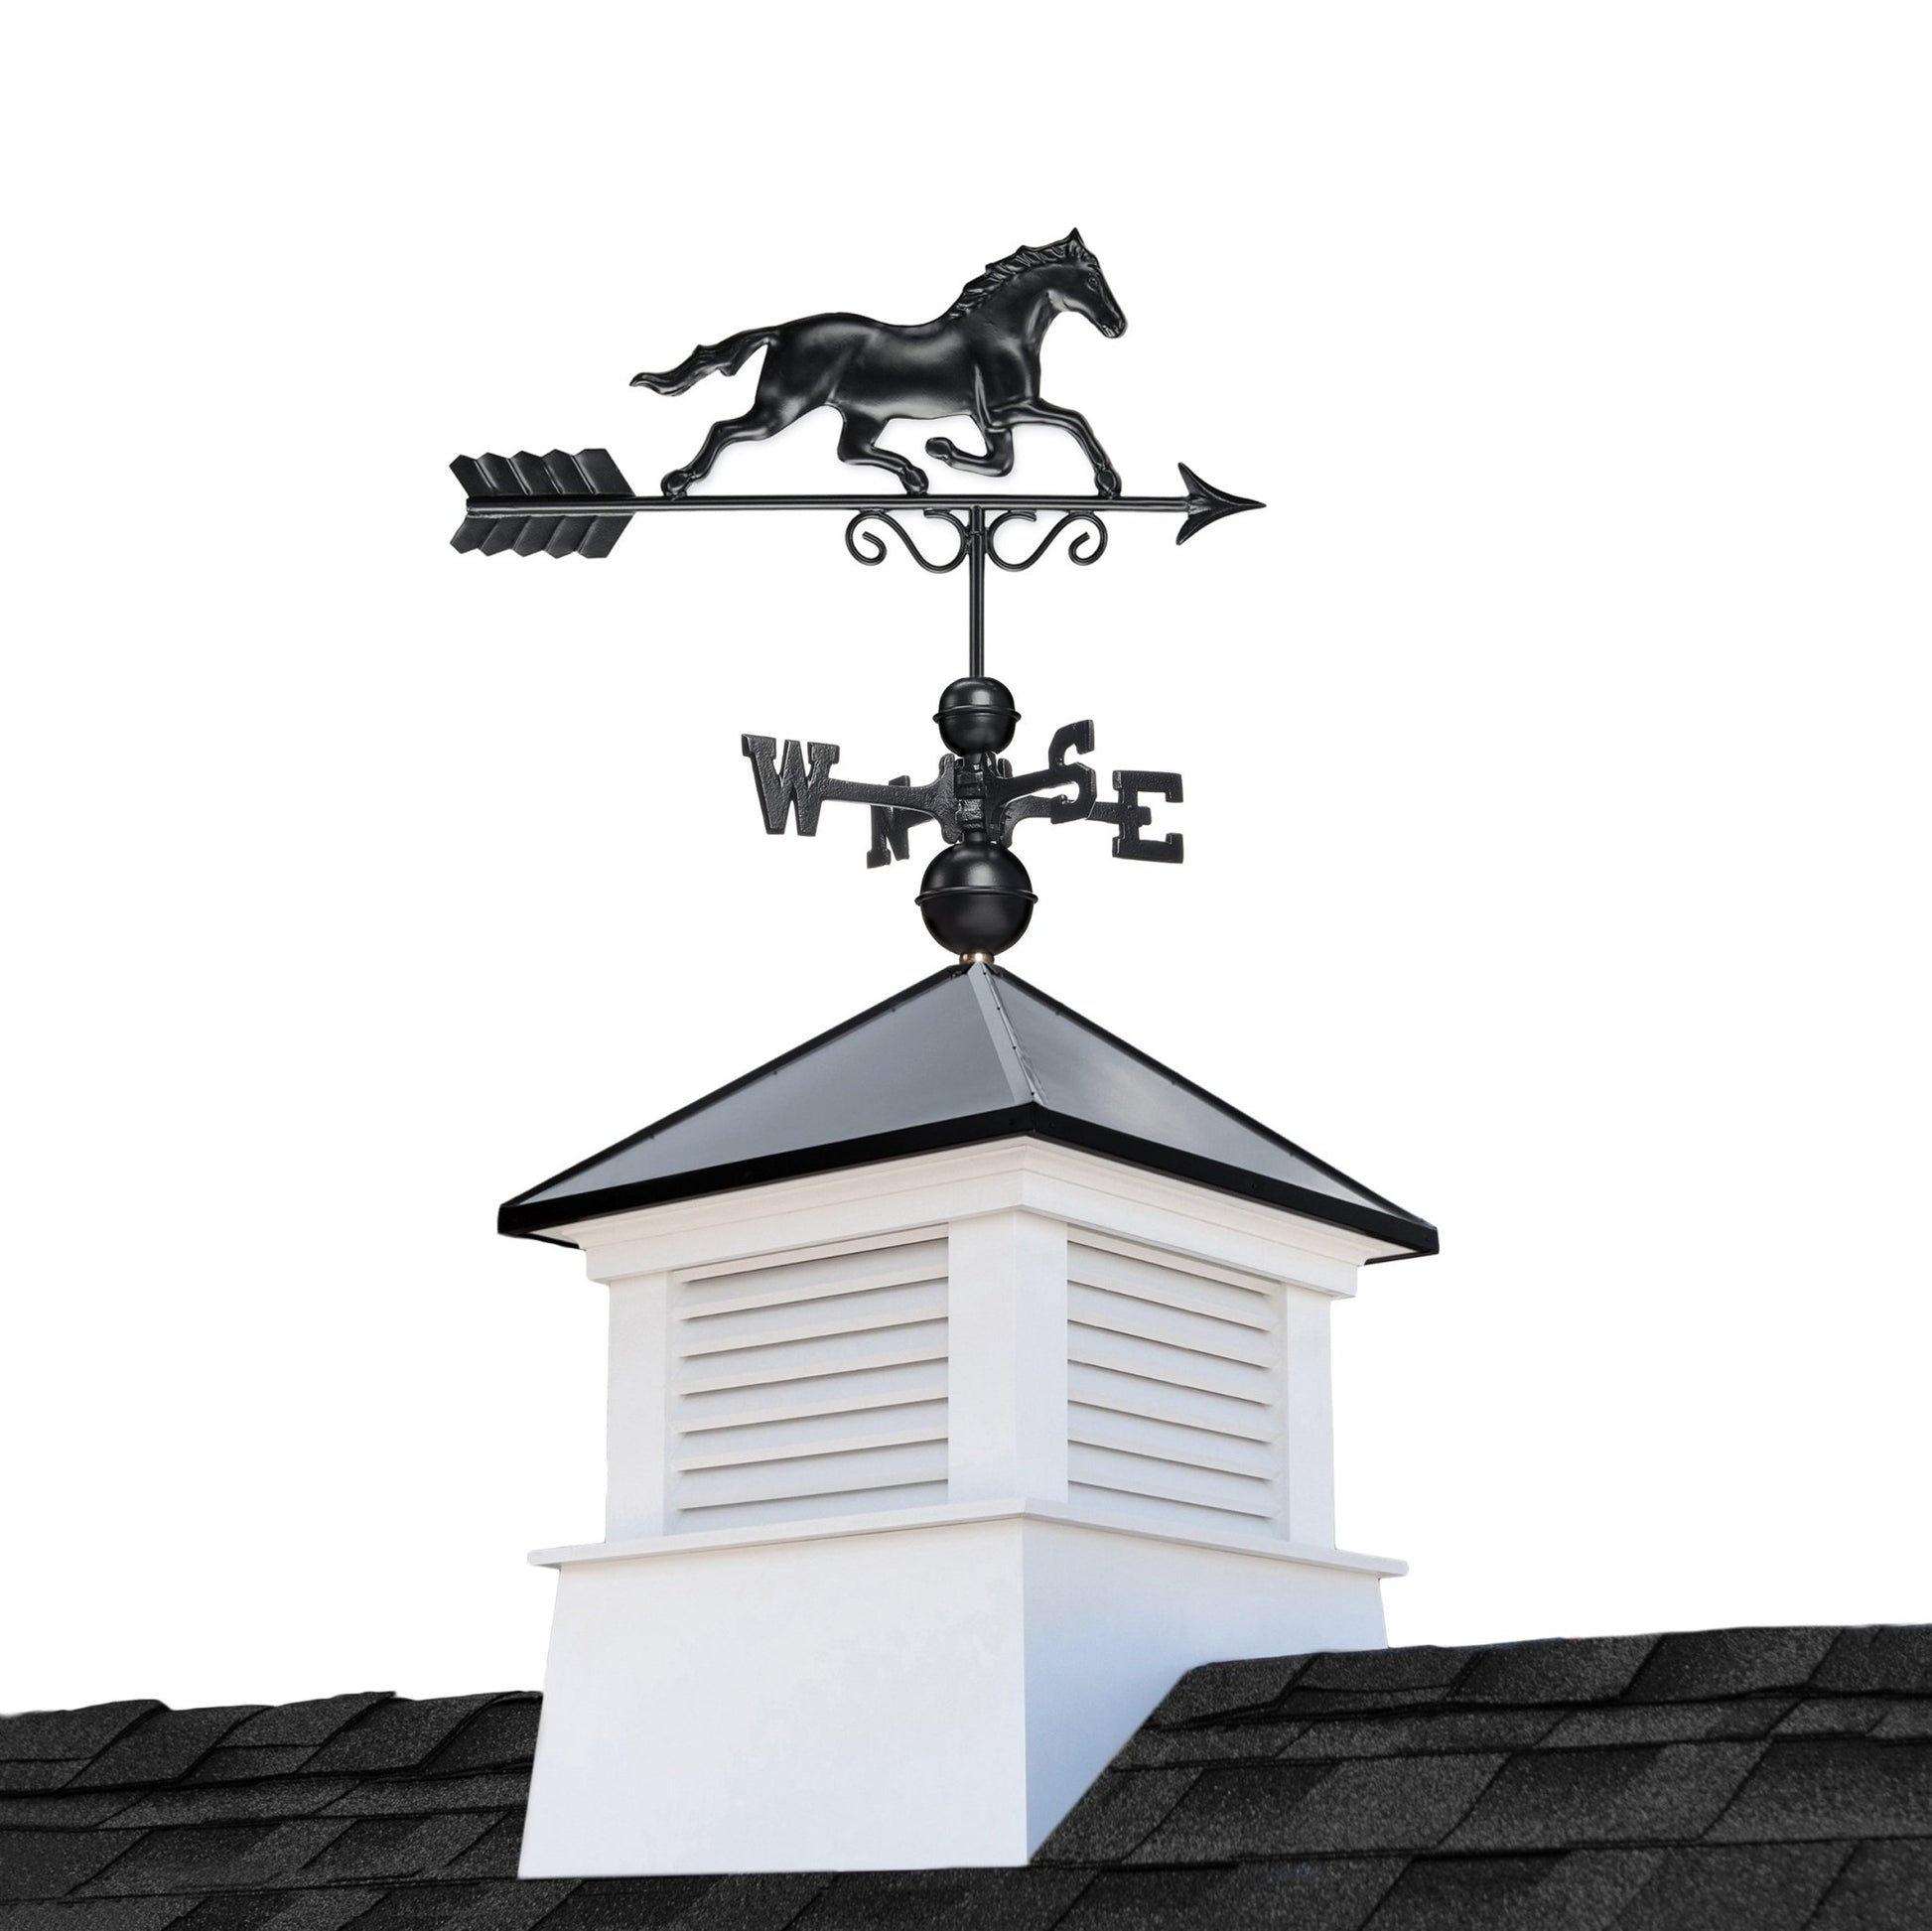 18" Square Manchester Vinyl Cupola with Black Aluminum roof and Black Aluminum Horse - Good Directions